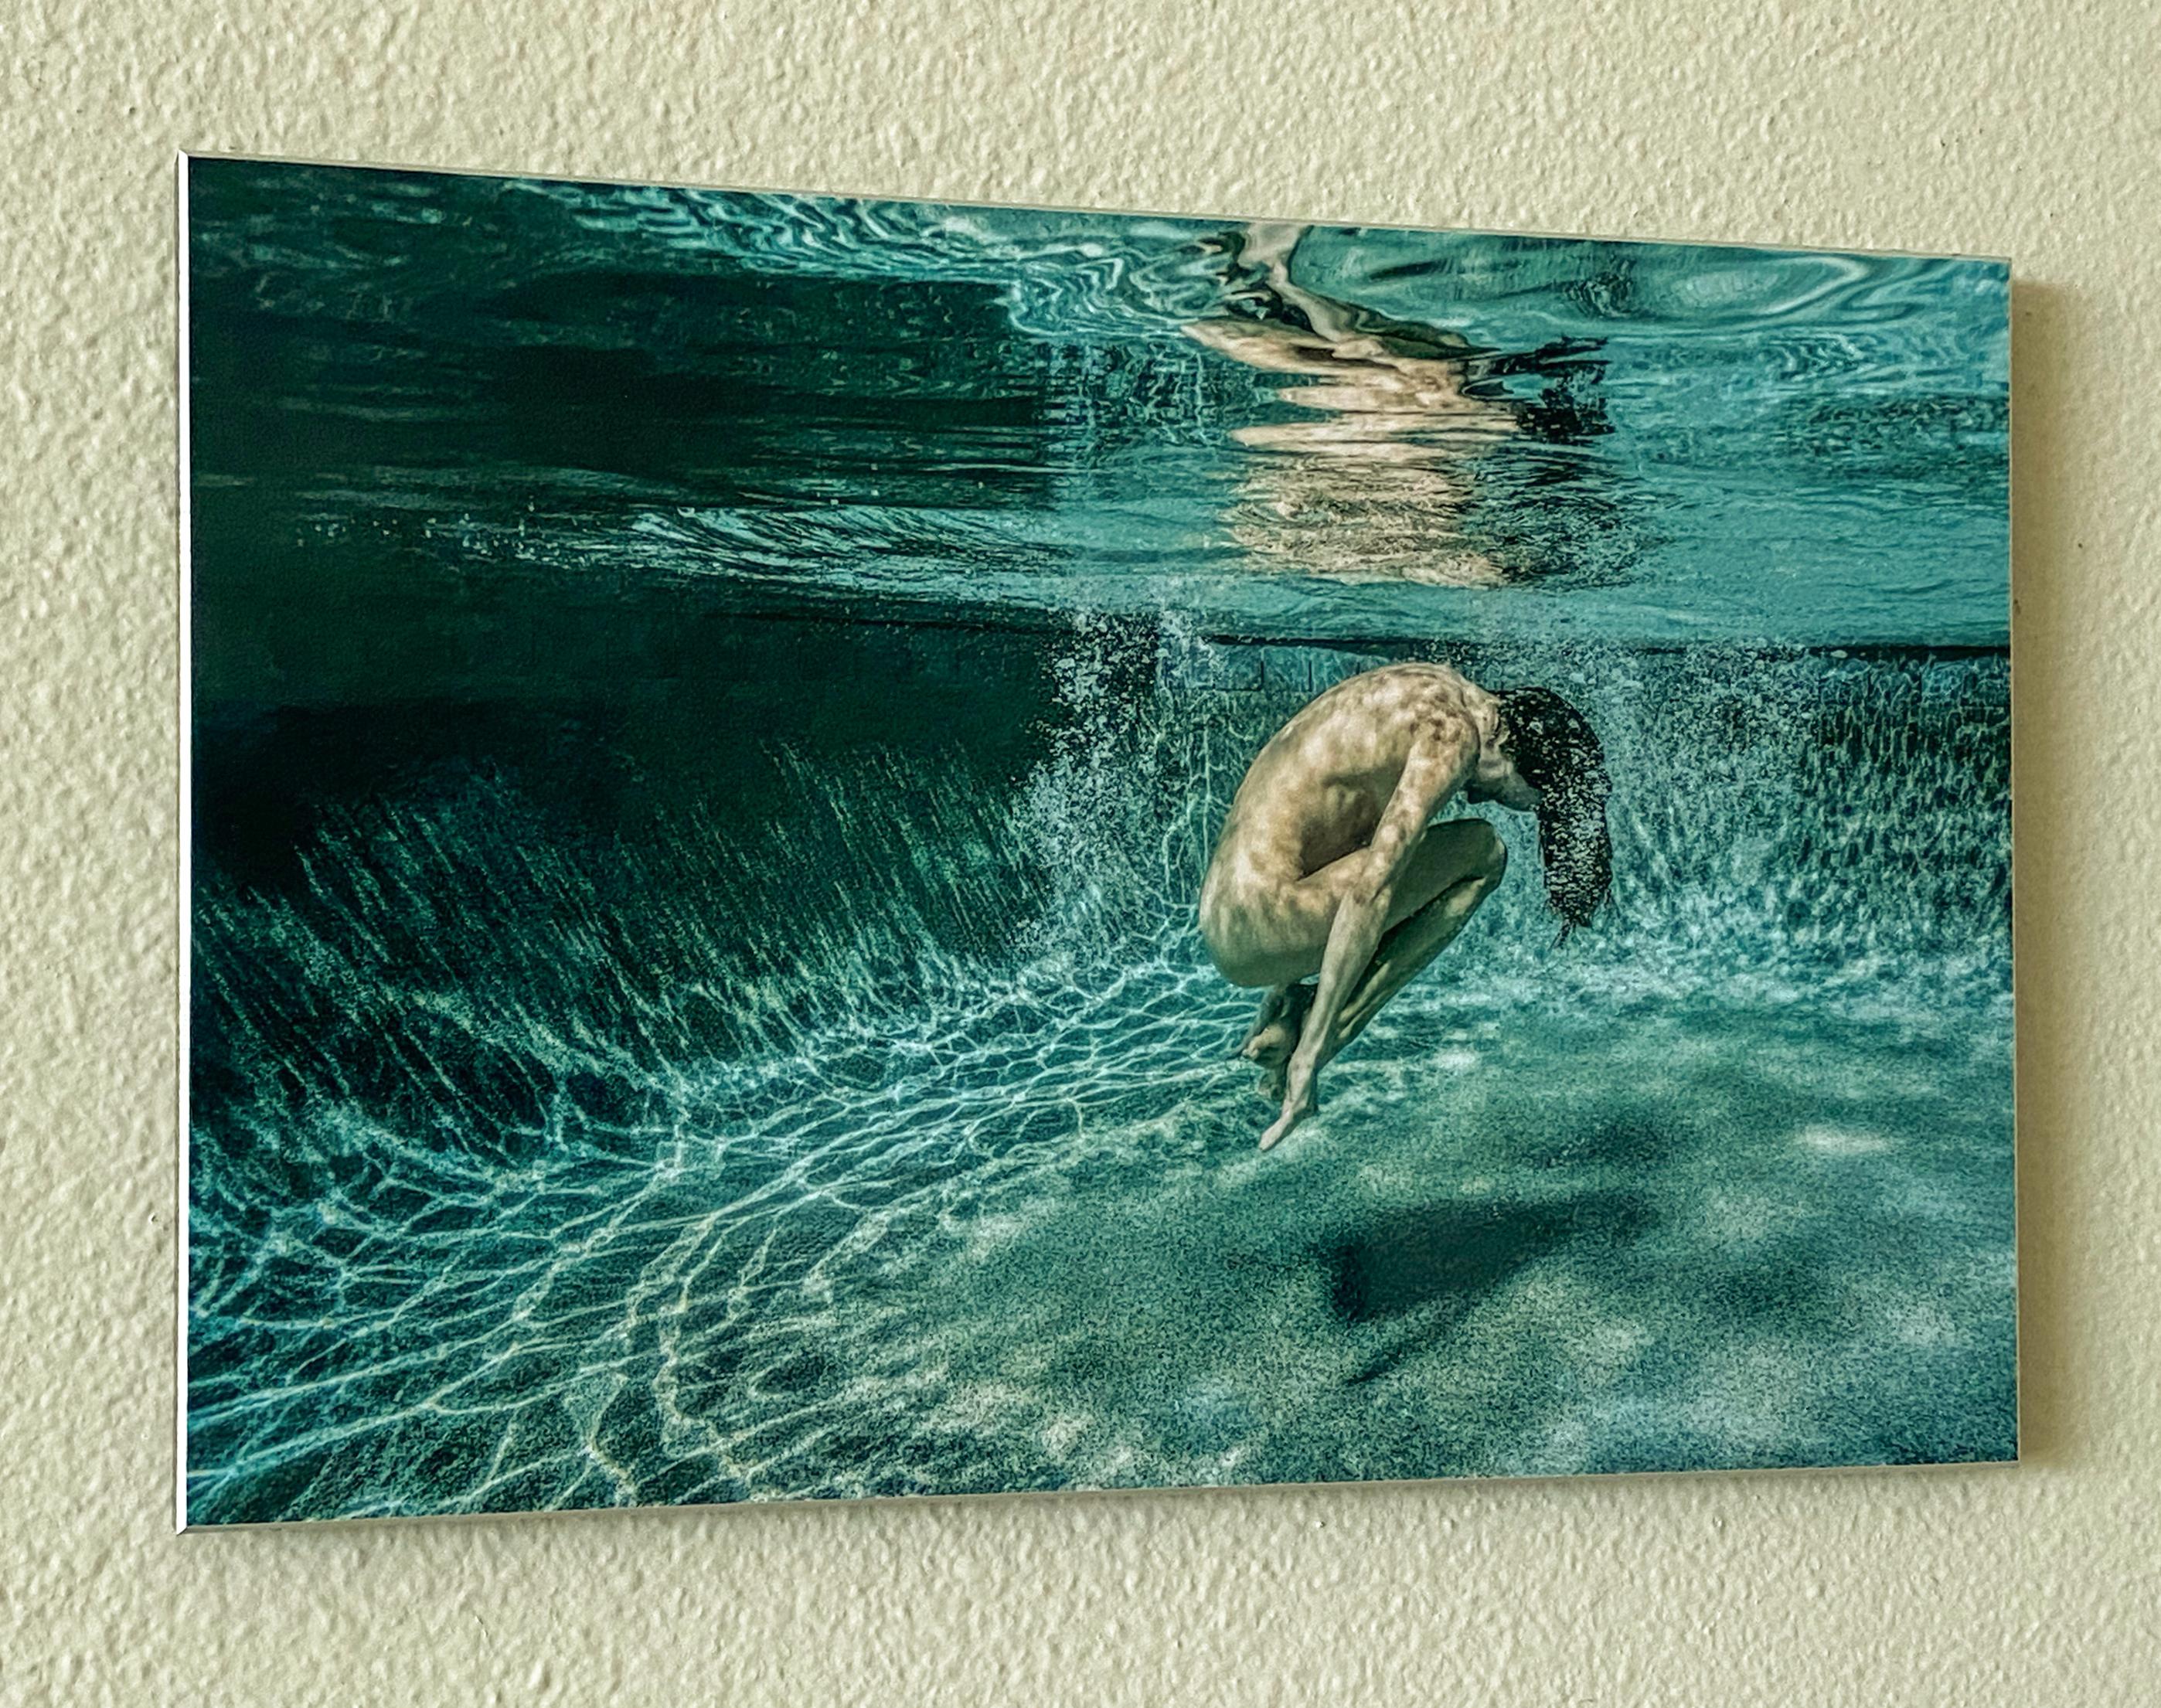 Green Roll III  - underwater nude photograph - print on aluminum - Contemporary Photograph by Alex Sher